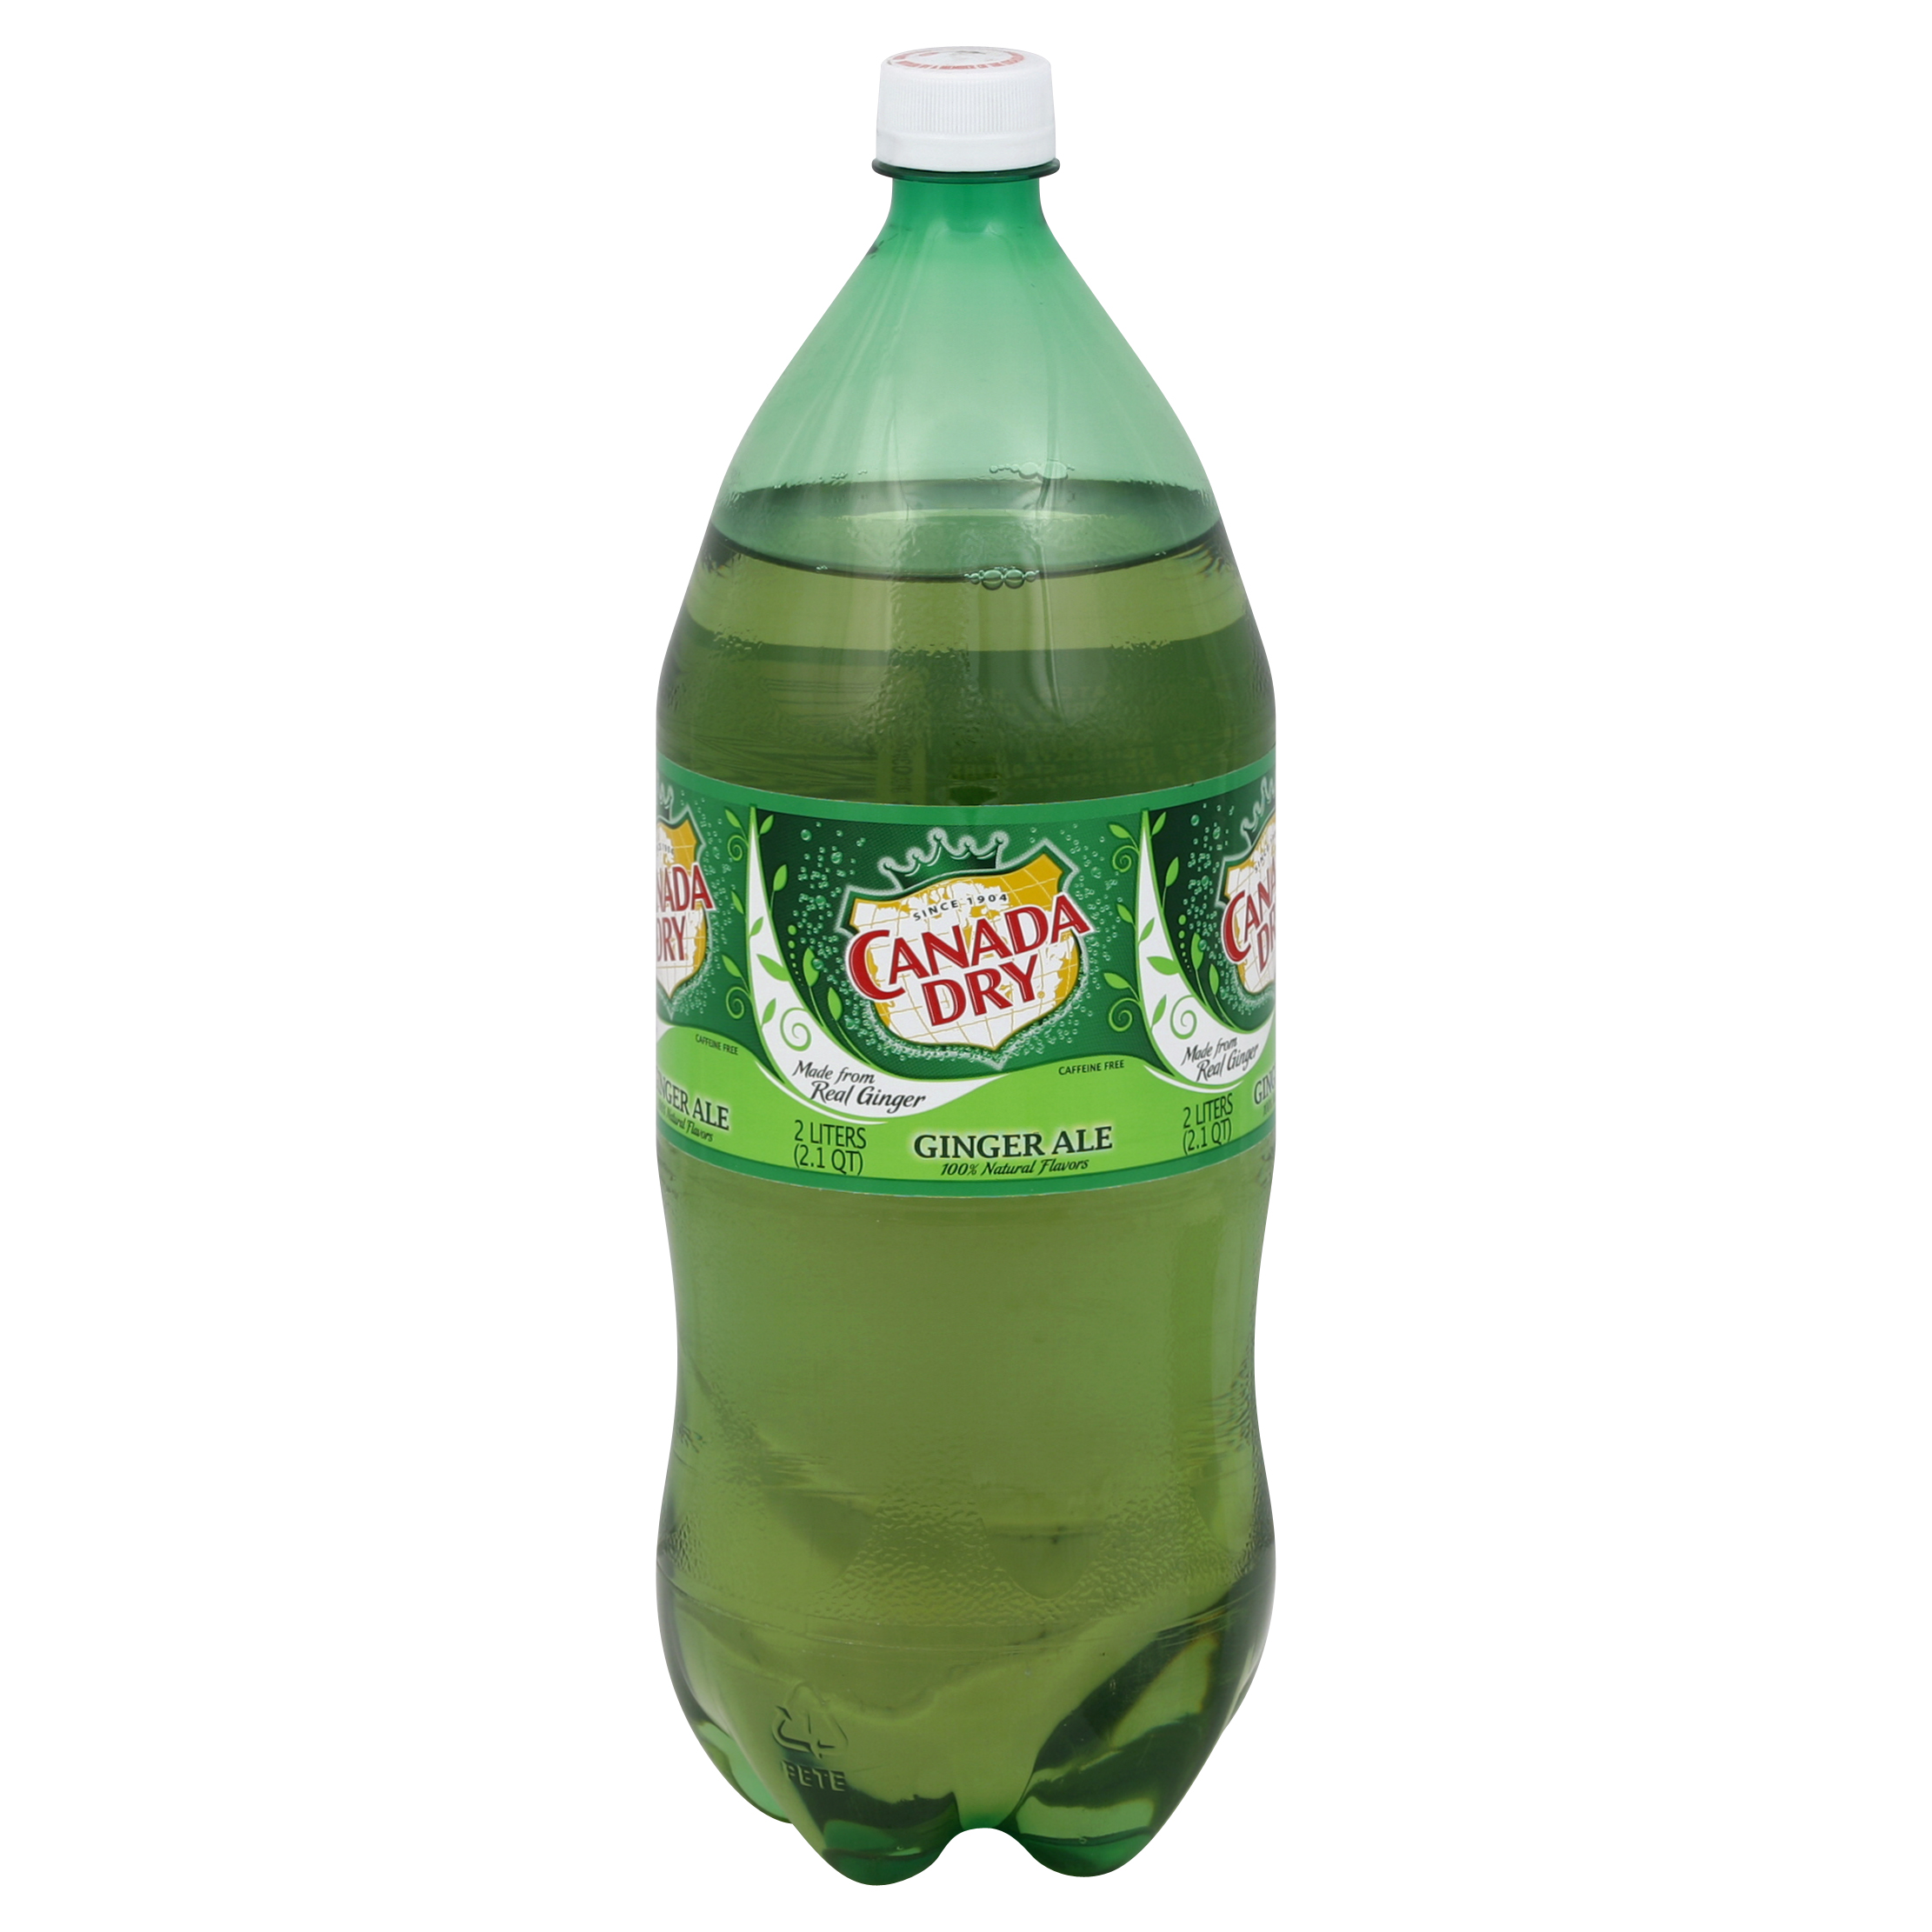 CANADA DRY GING ALE